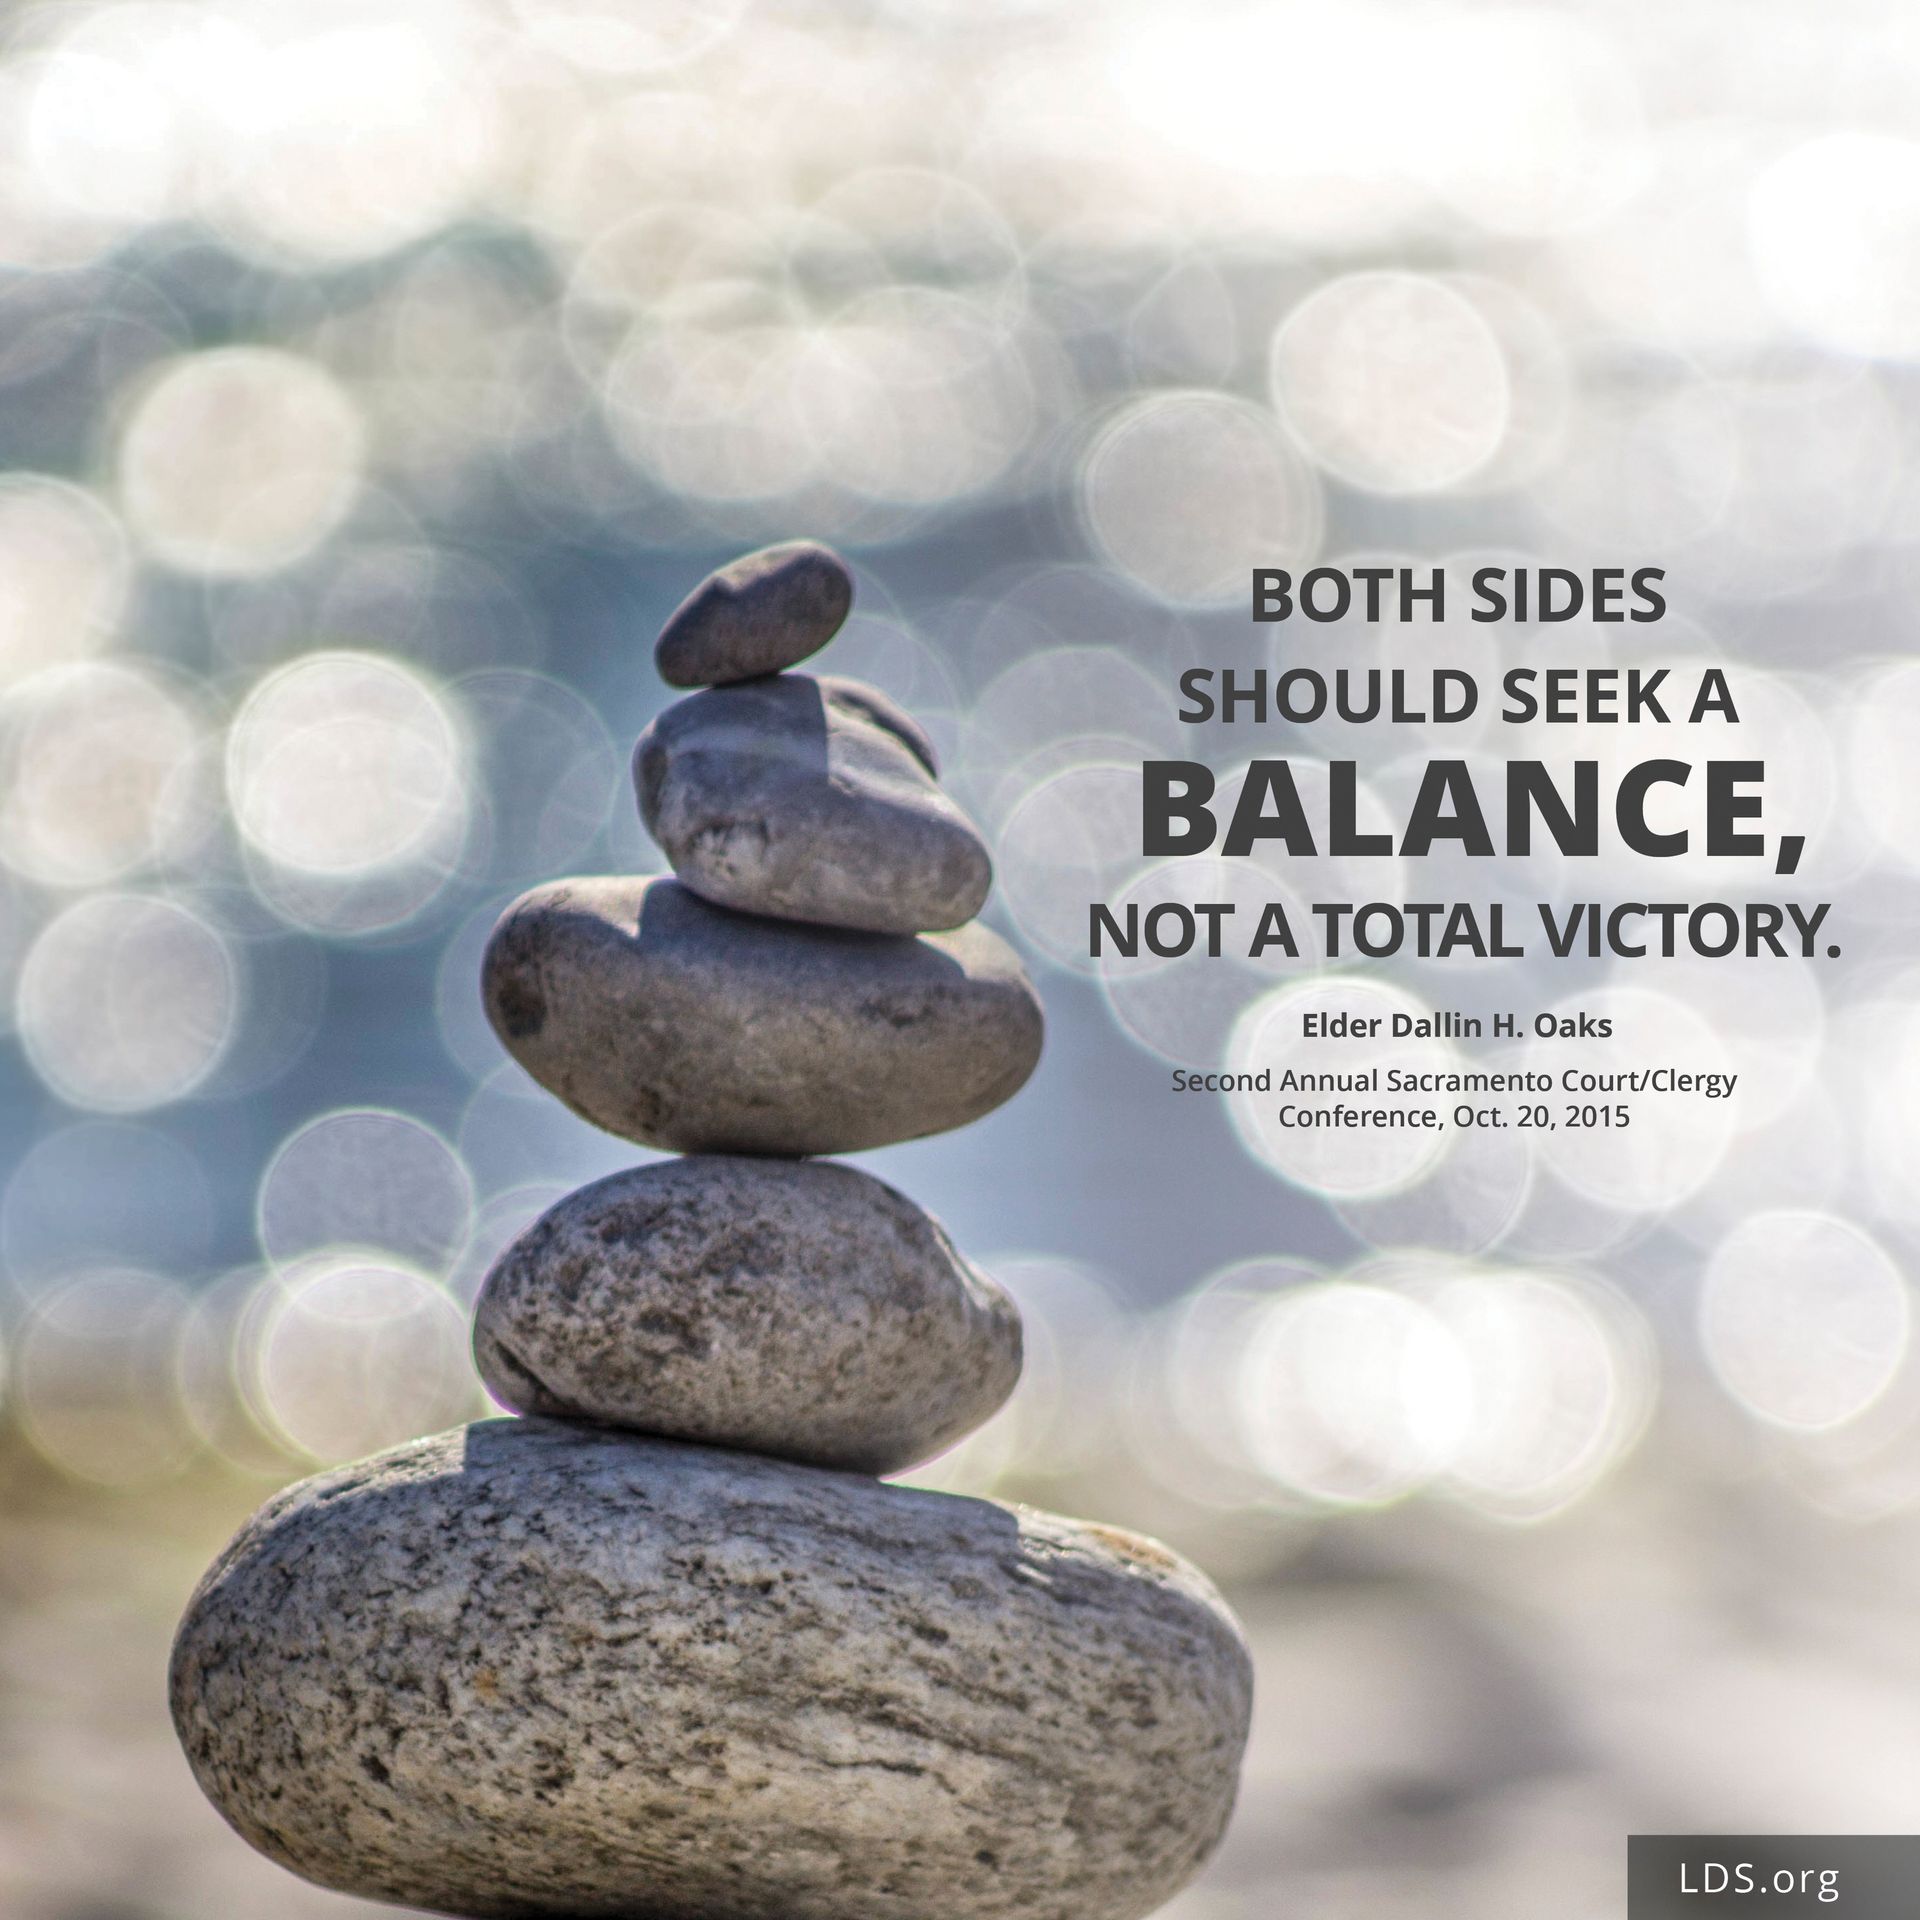 “Both sides should seek a balance, not a total victory.”—Elder Dallin H. Oaks, Second Annual Sacramento Court/Clergy Conference, Oct. 20, 2015